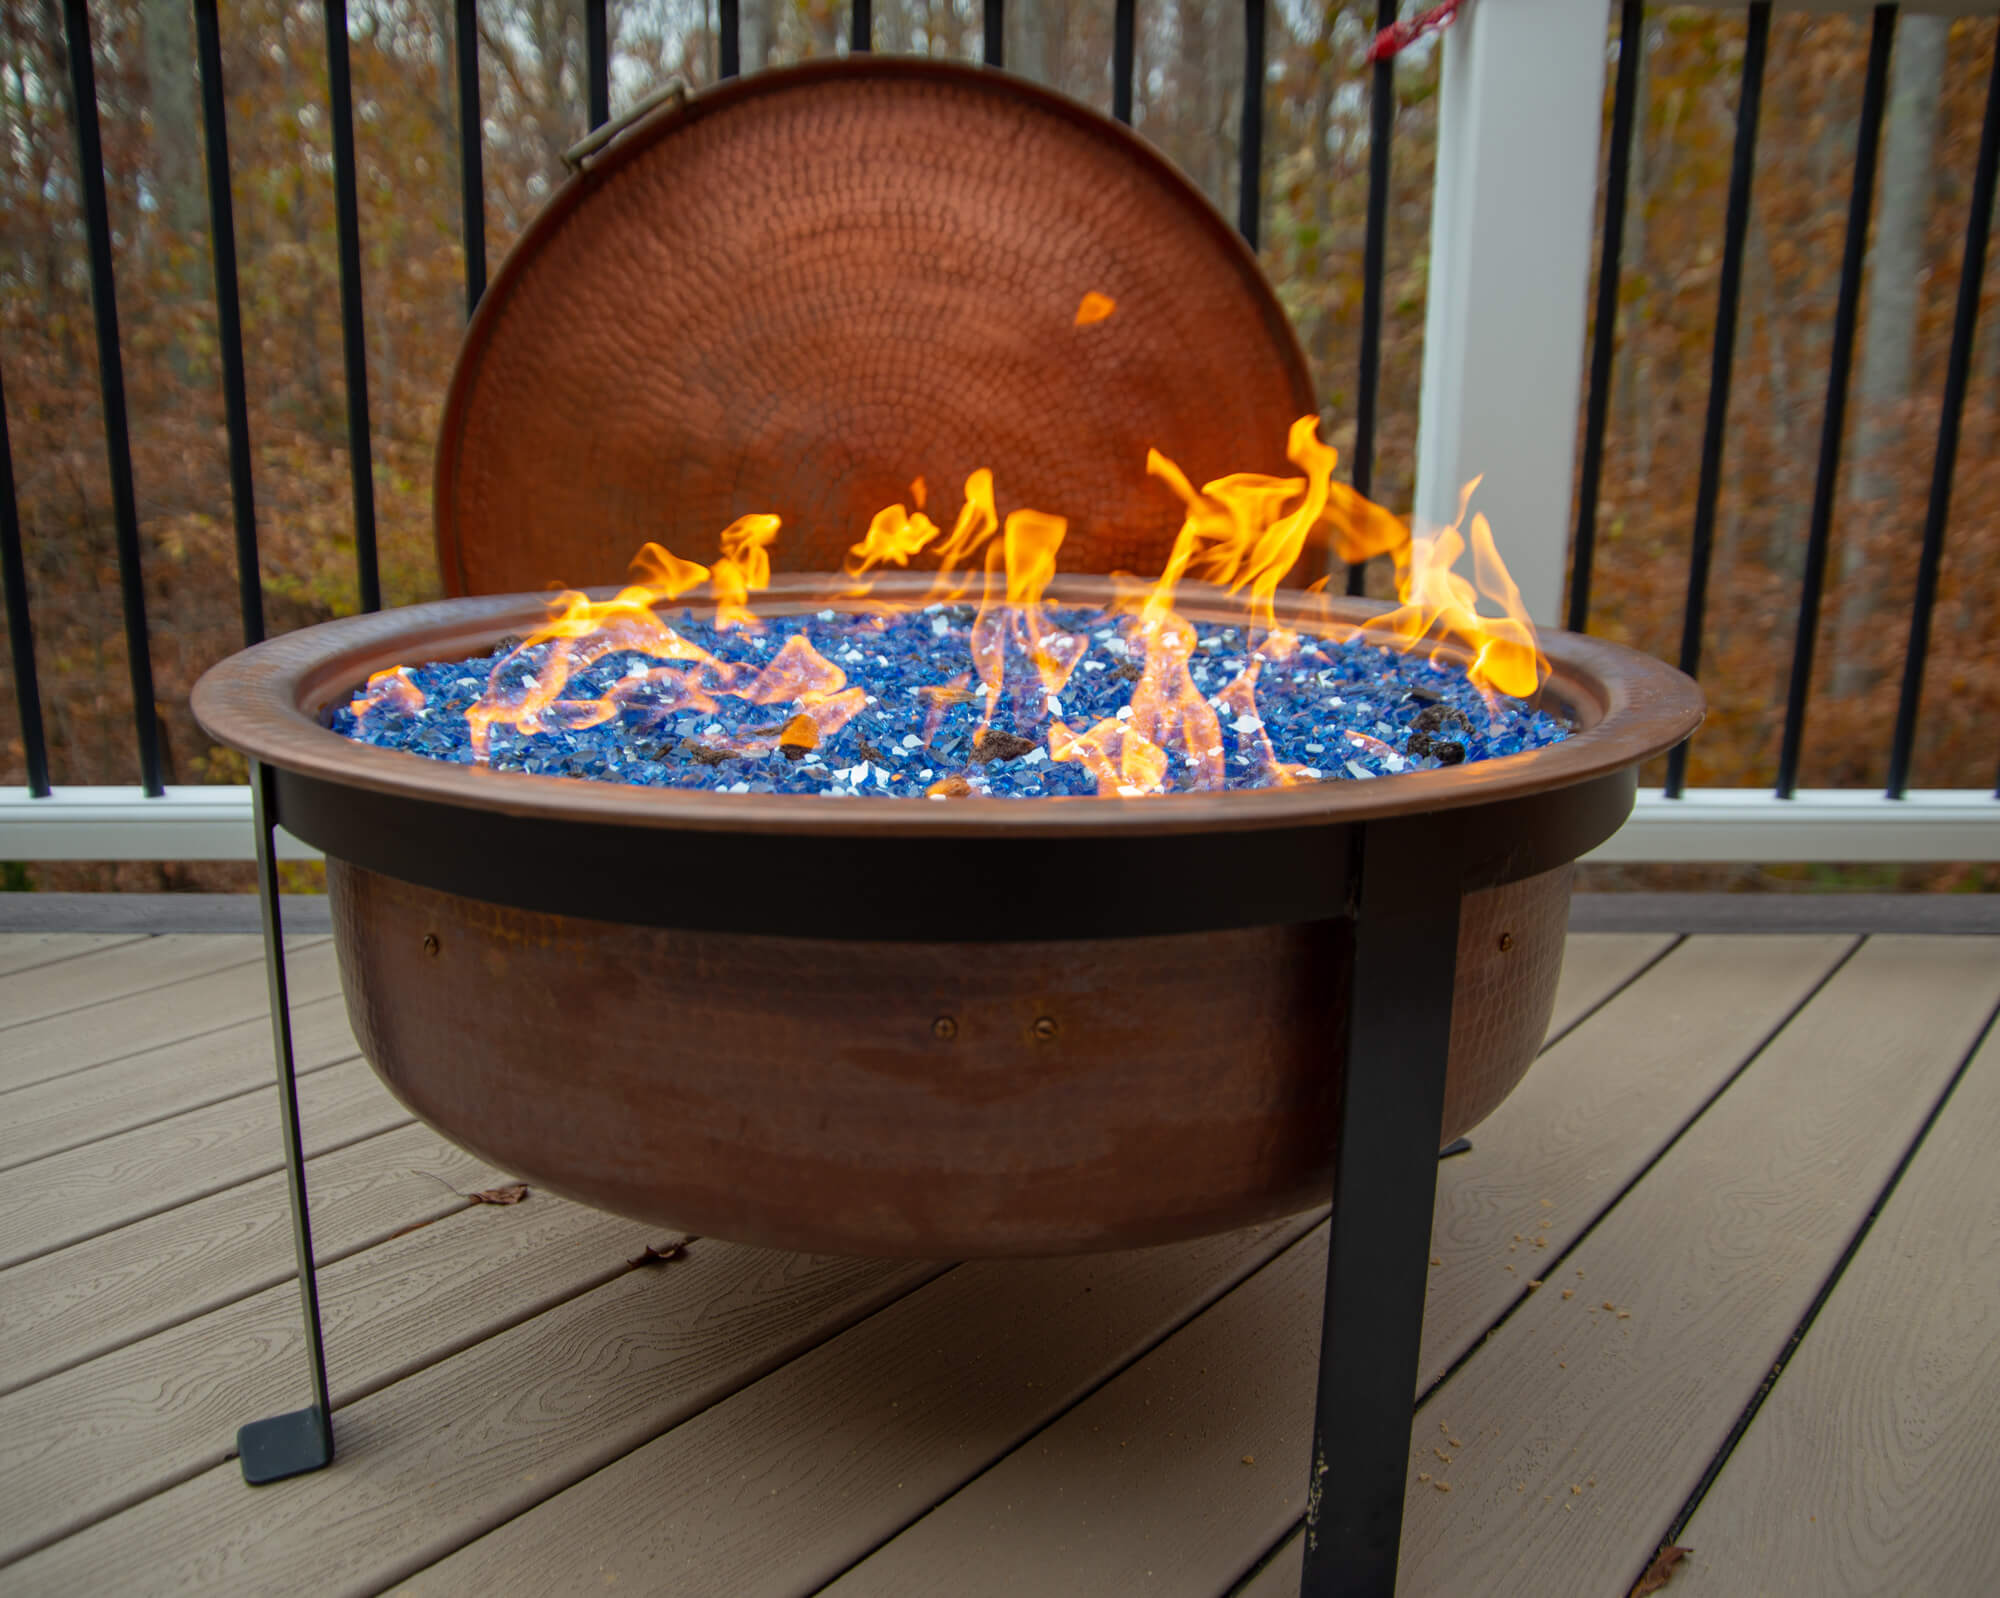 6 Ways To Put A Fire Pit On Wooden Deck, Can A Gas Fire Pit Be Used On Composite Deck